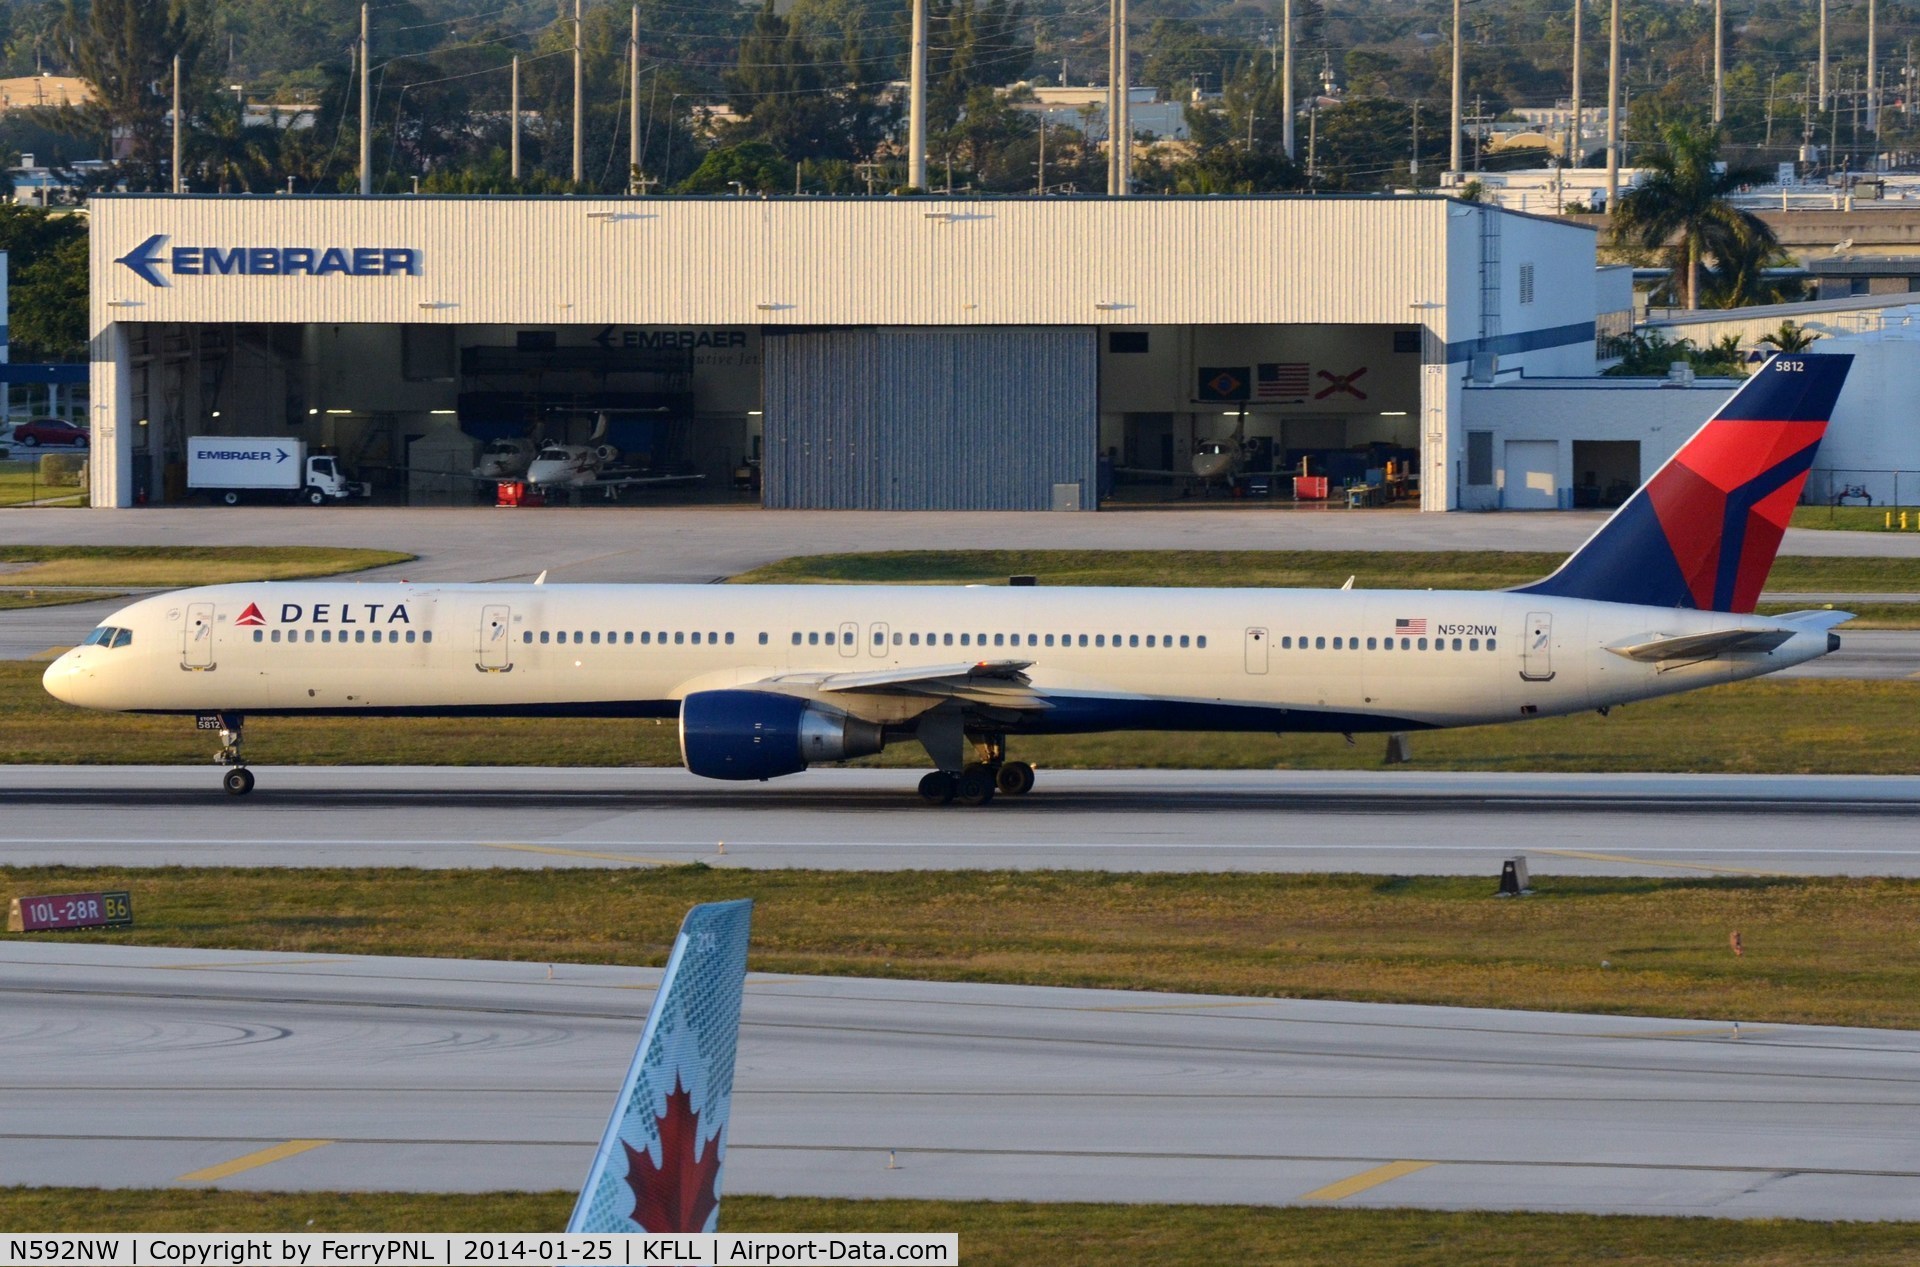 N592NW, 2003 Boeing 757-351 C/N 32992, Delta B753 taking-off from FLL